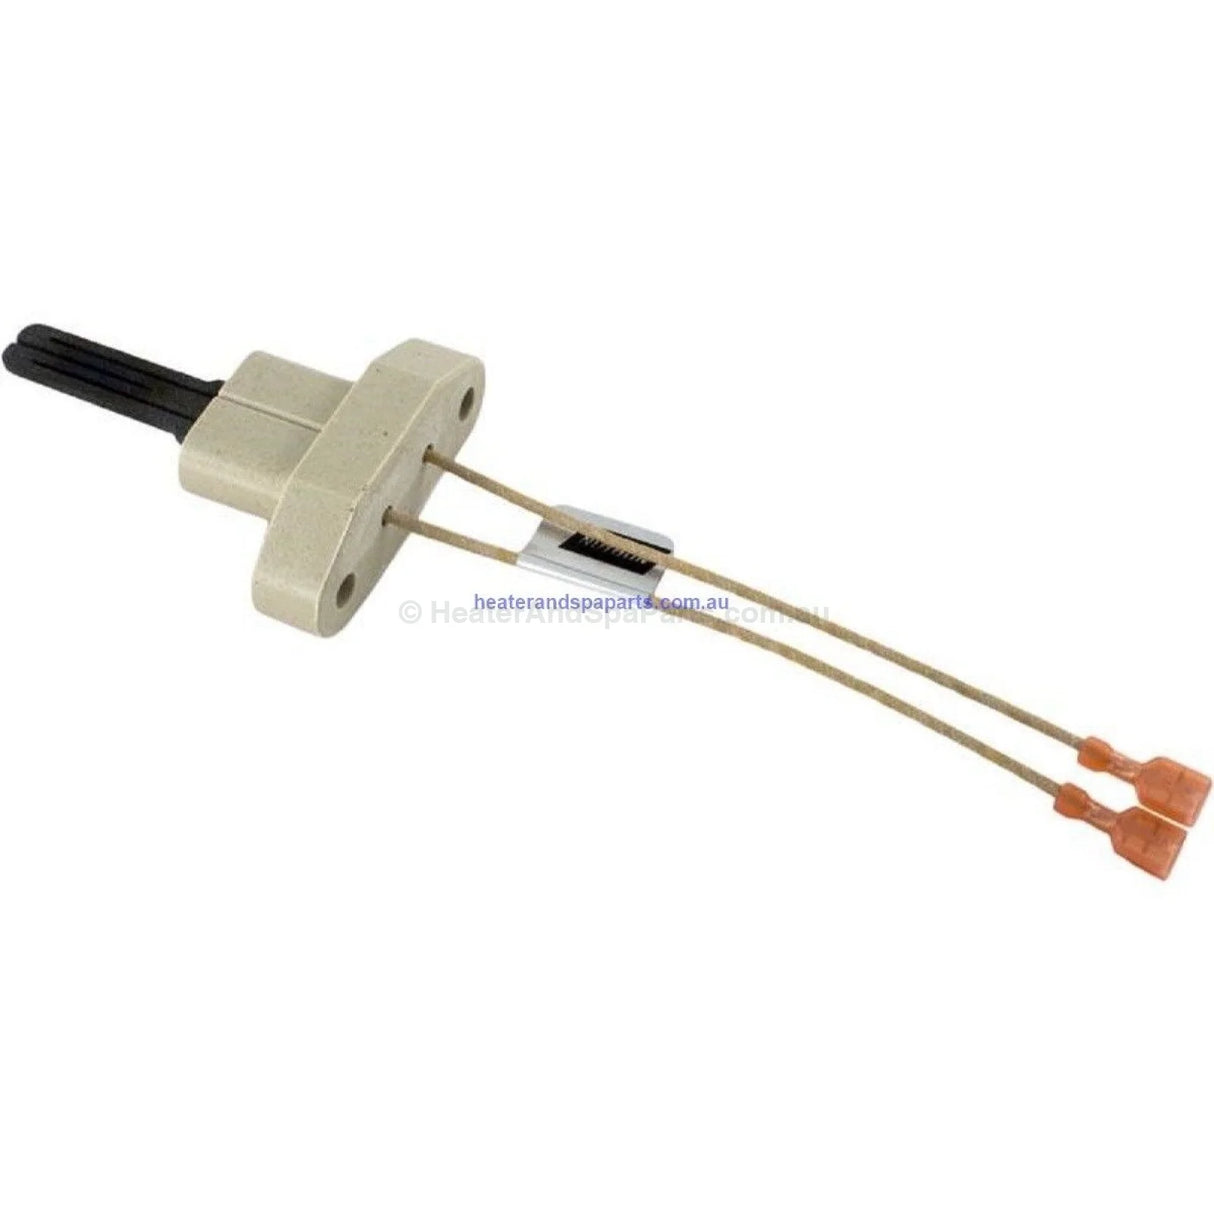 Zodiac Jandy LRZ HSI Hot Surface Igniter - R0457501 - Heater and Spa Parts